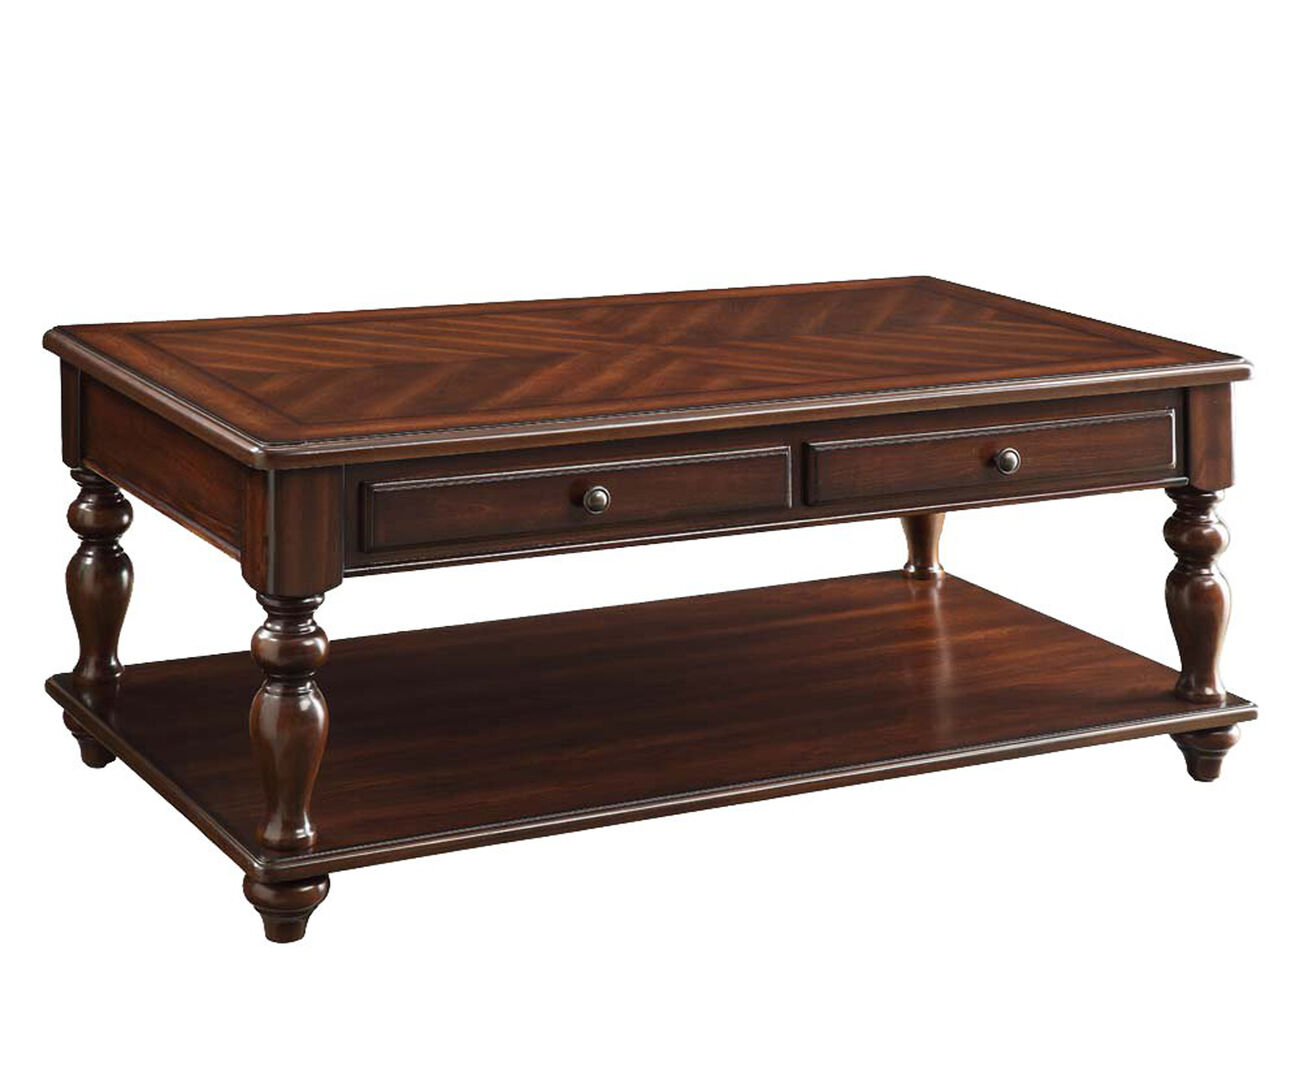 Stunning Coffee Table with Lift Top, Walnut Brown